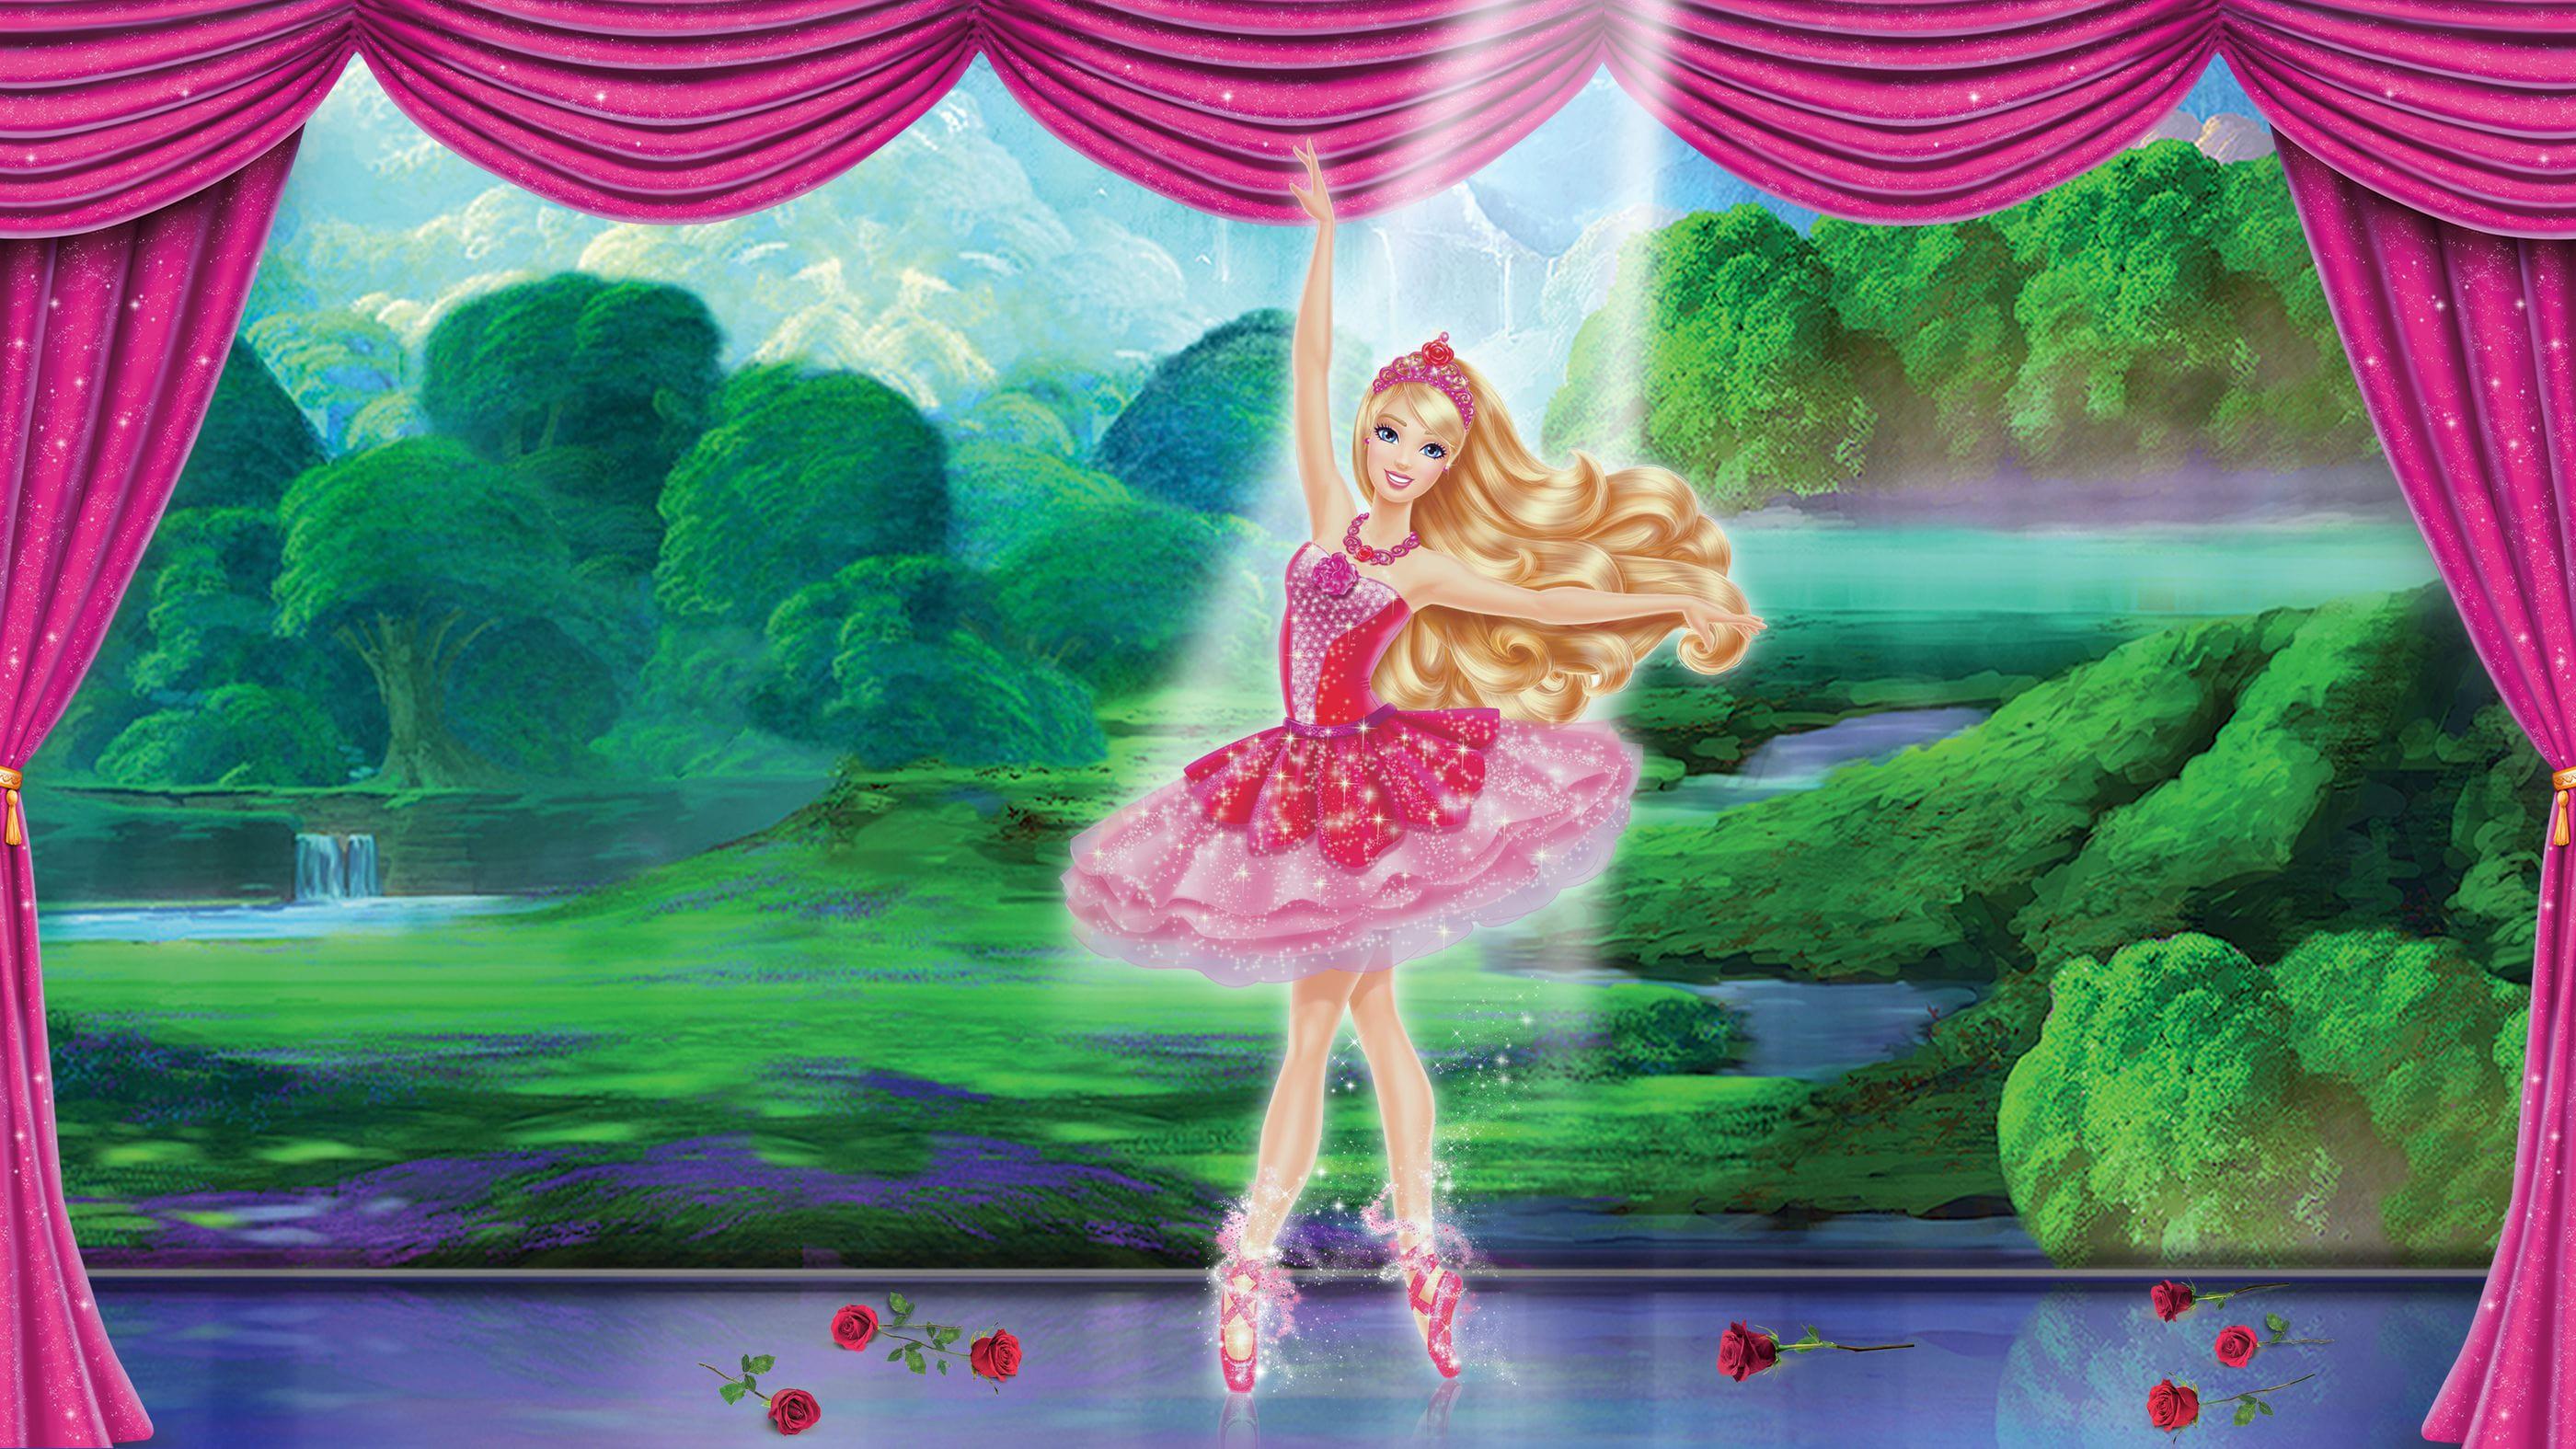 Barbie in the Pink Shoes backdrop